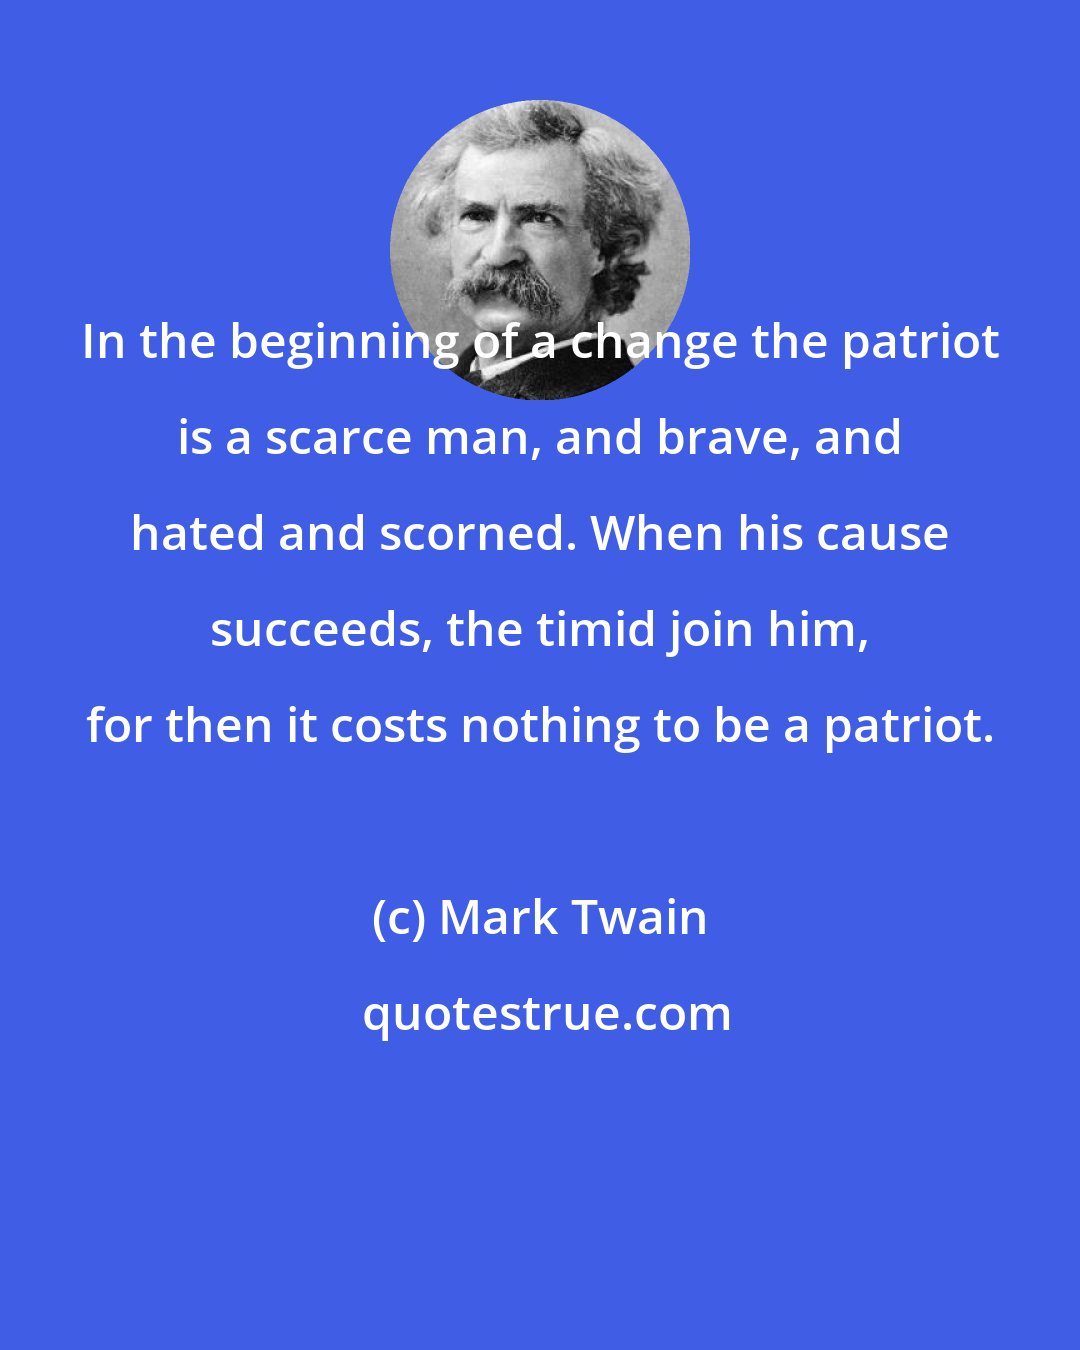 Mark Twain: In the beginning of a change the patriot is a scarce man, and brave, and hated and scorned. When his cause succeeds, the timid join him, for then it costs nothing to be a patriot.